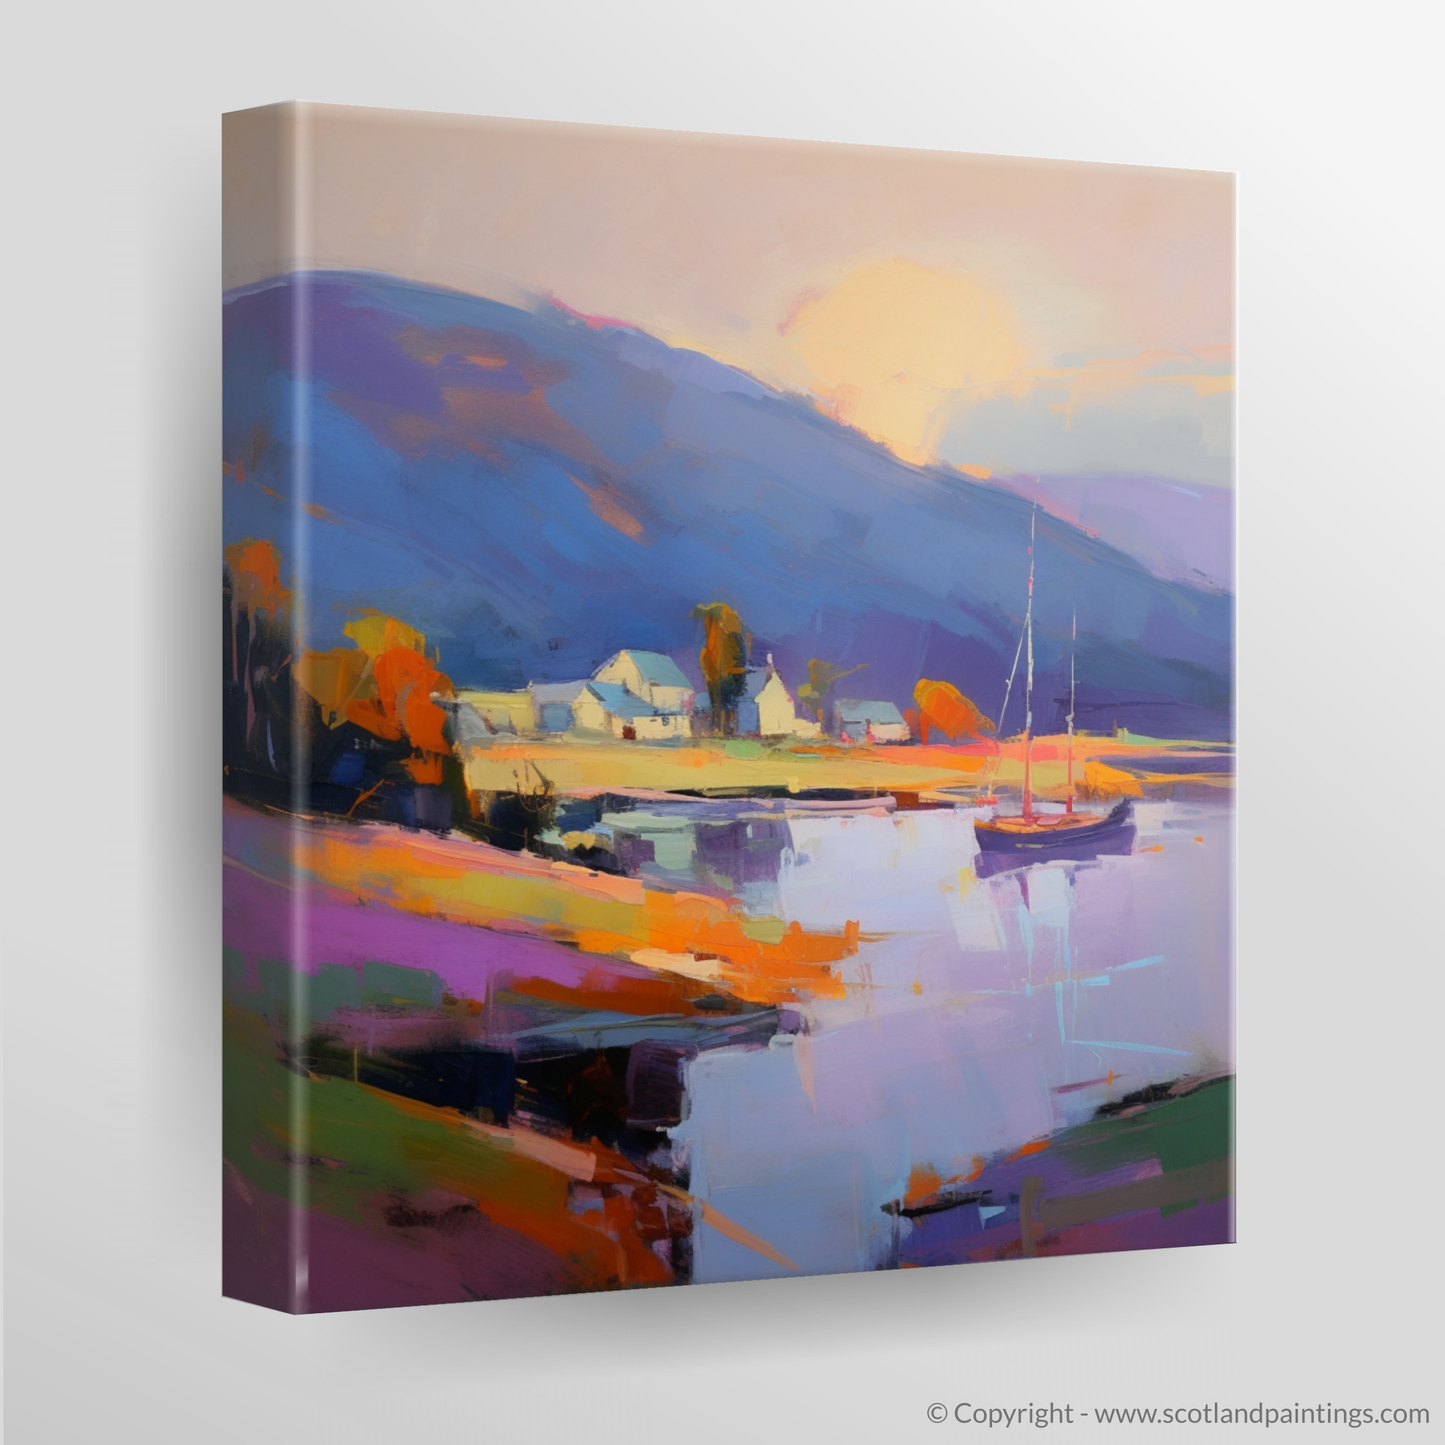 Cromarty Harbour Sunset: An Expressionist Ode to Nature's Splendour